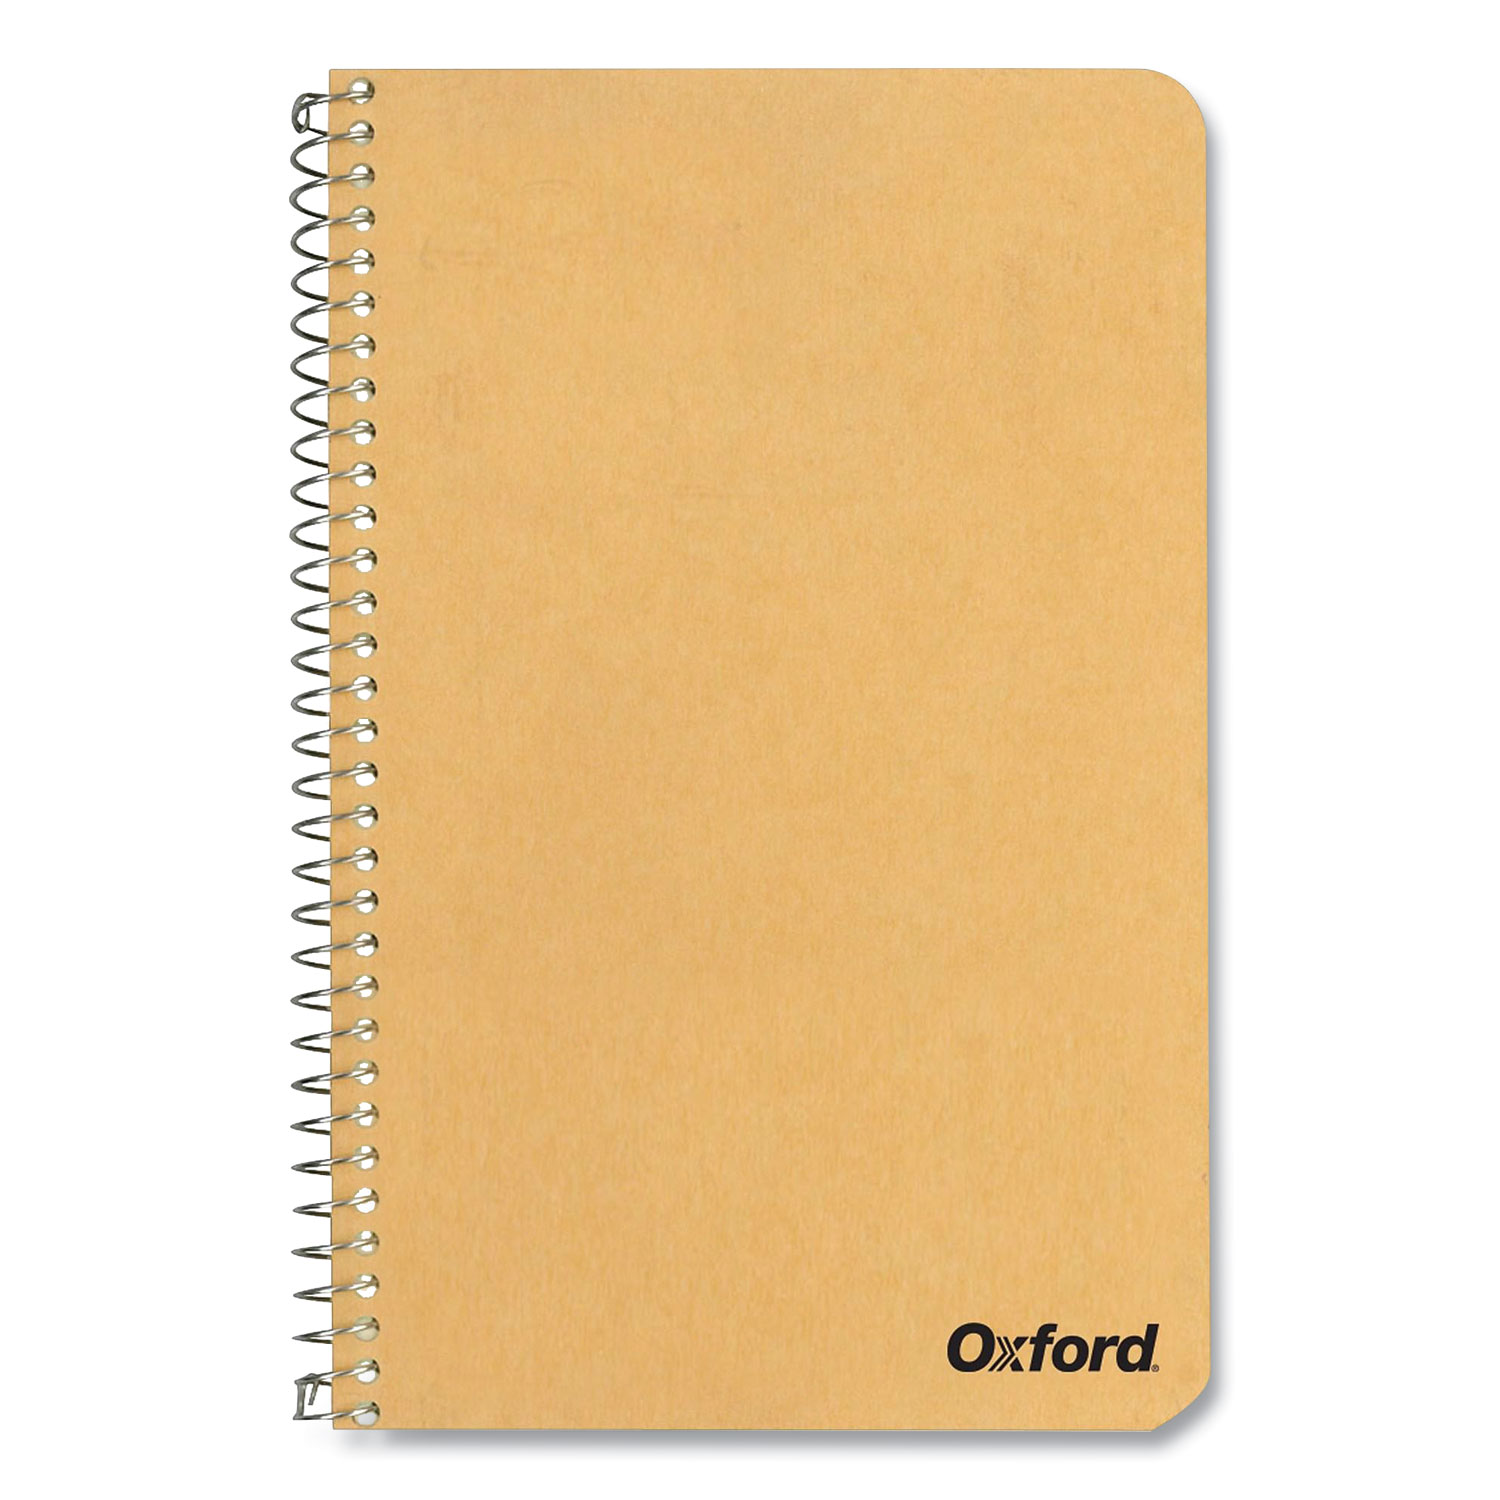  Oxford 25-404R One-Subject Notebook, Medium/College Rule, Tan Cover, 11 x 8.5, 80 Green Tint Sheets (OXF801043) 